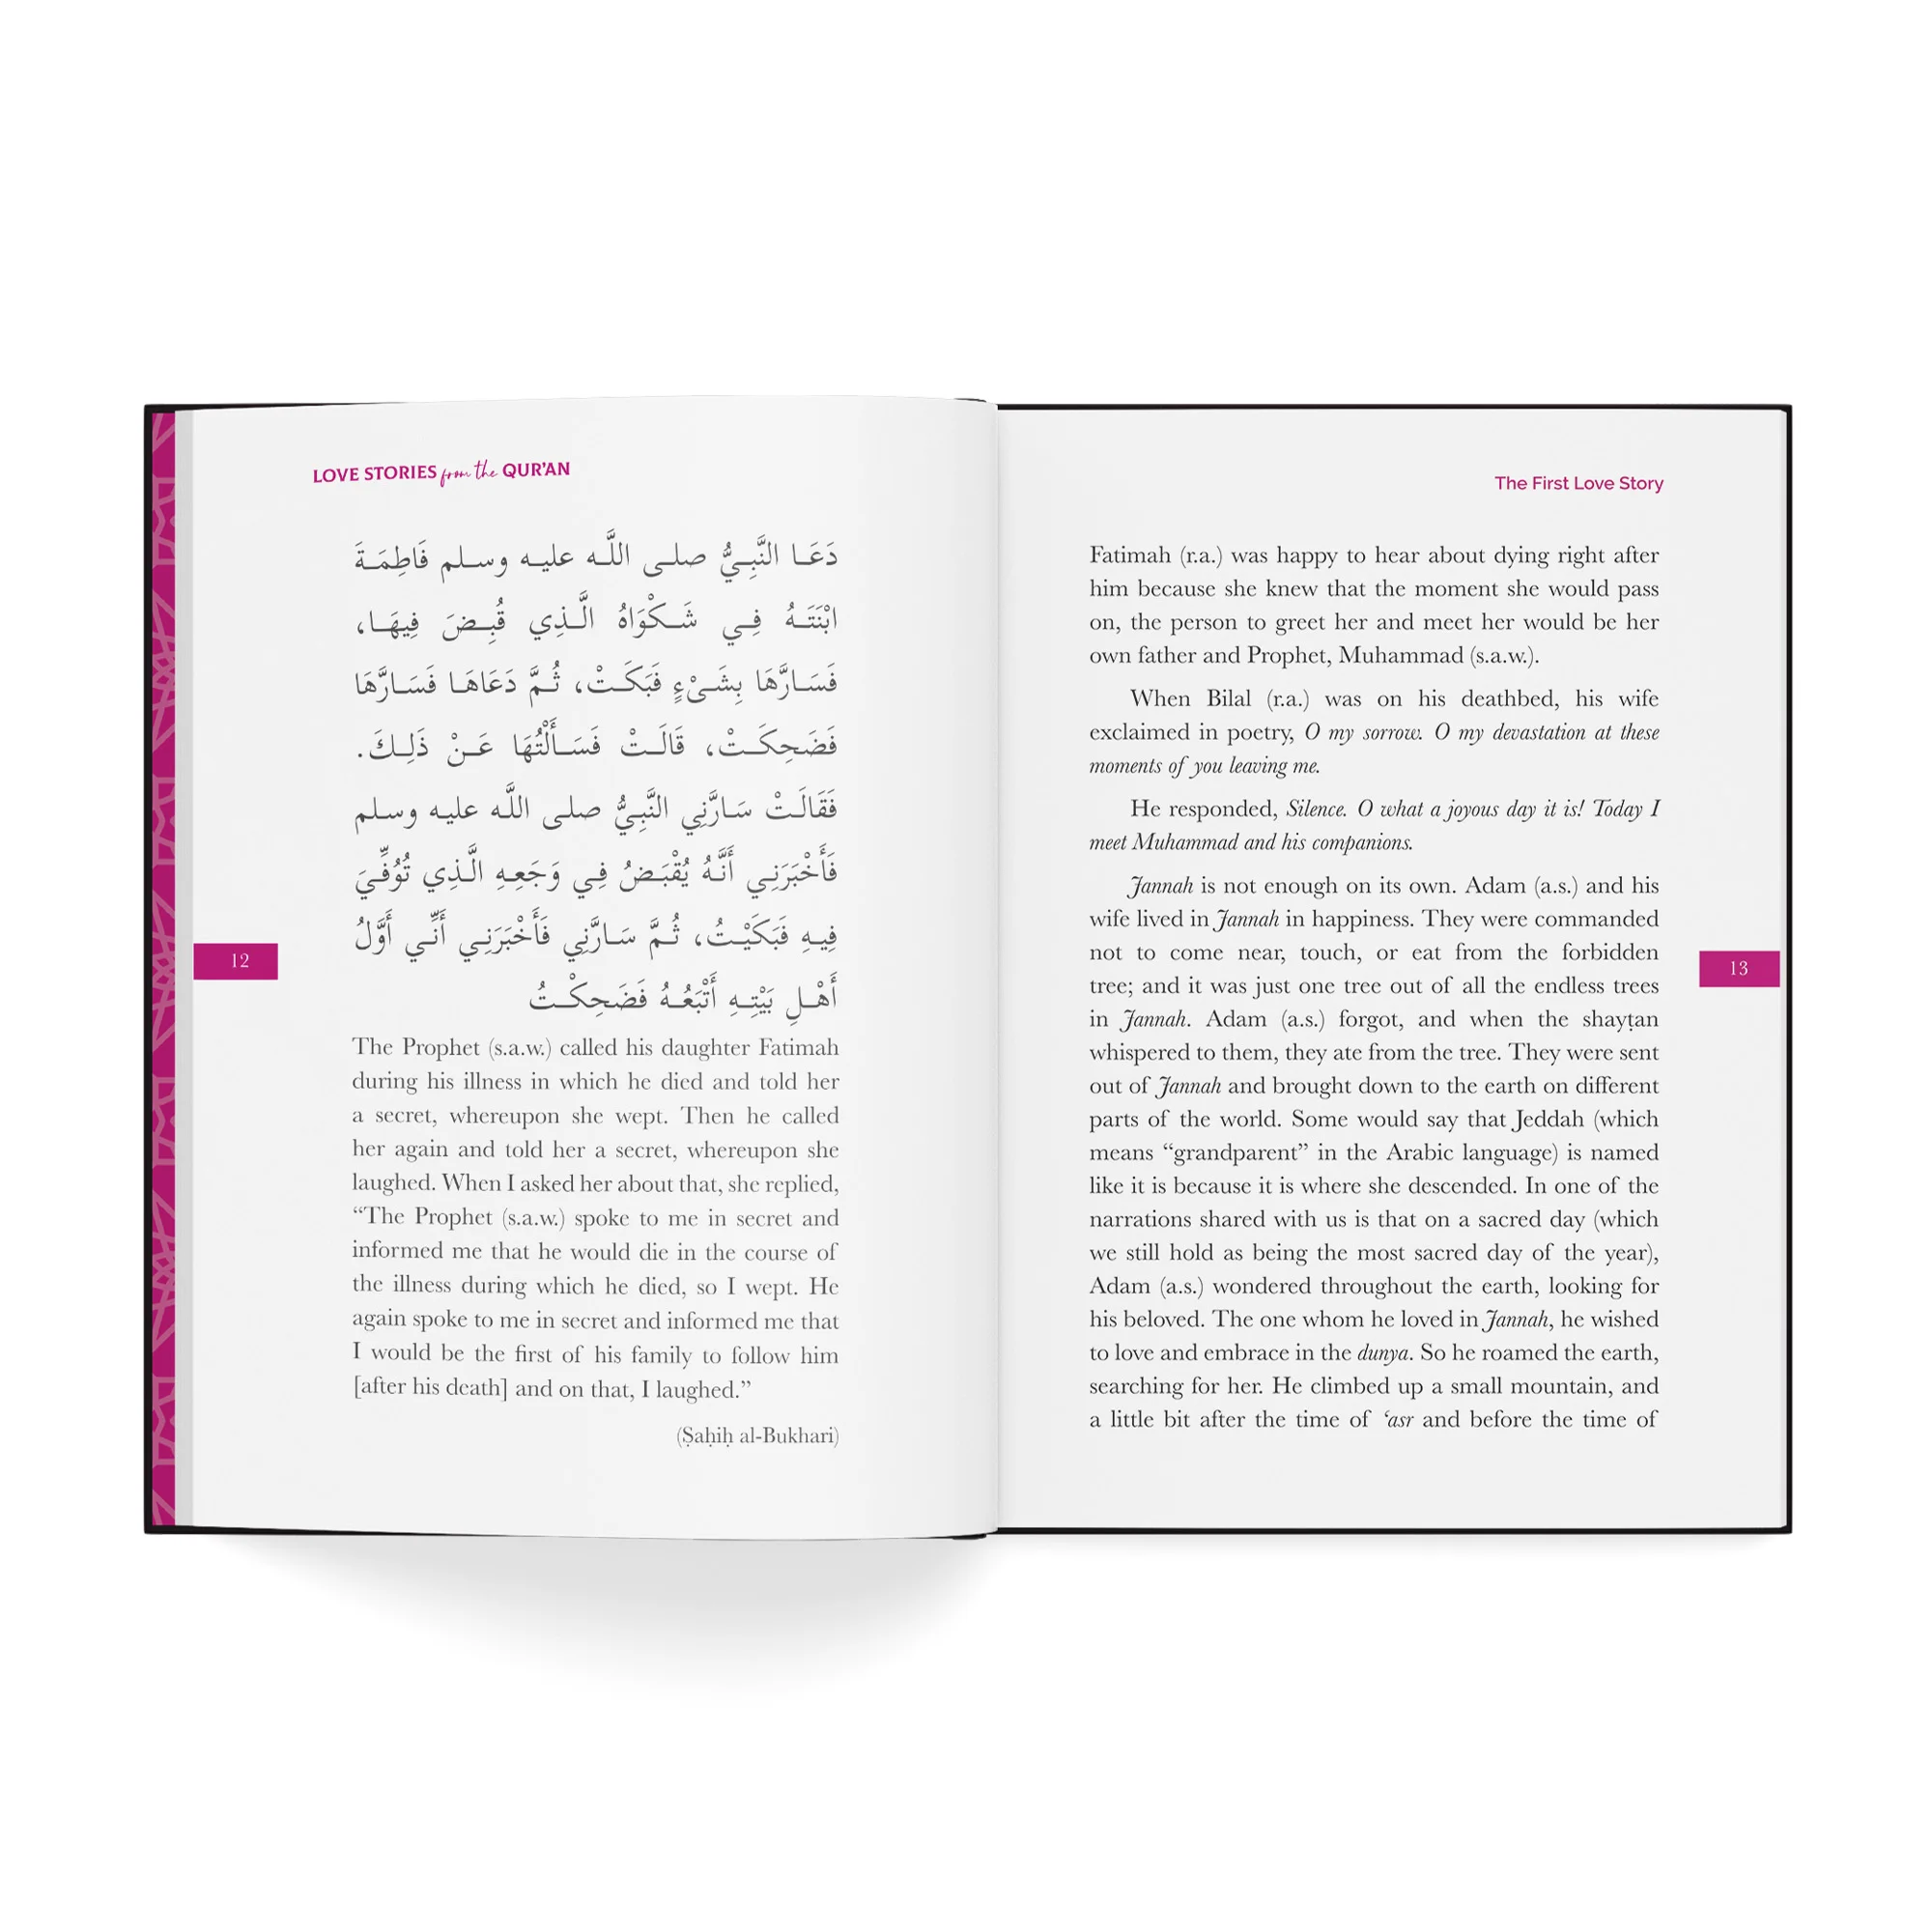 Love Stories from the Qur'an by Yahya Ibrahim